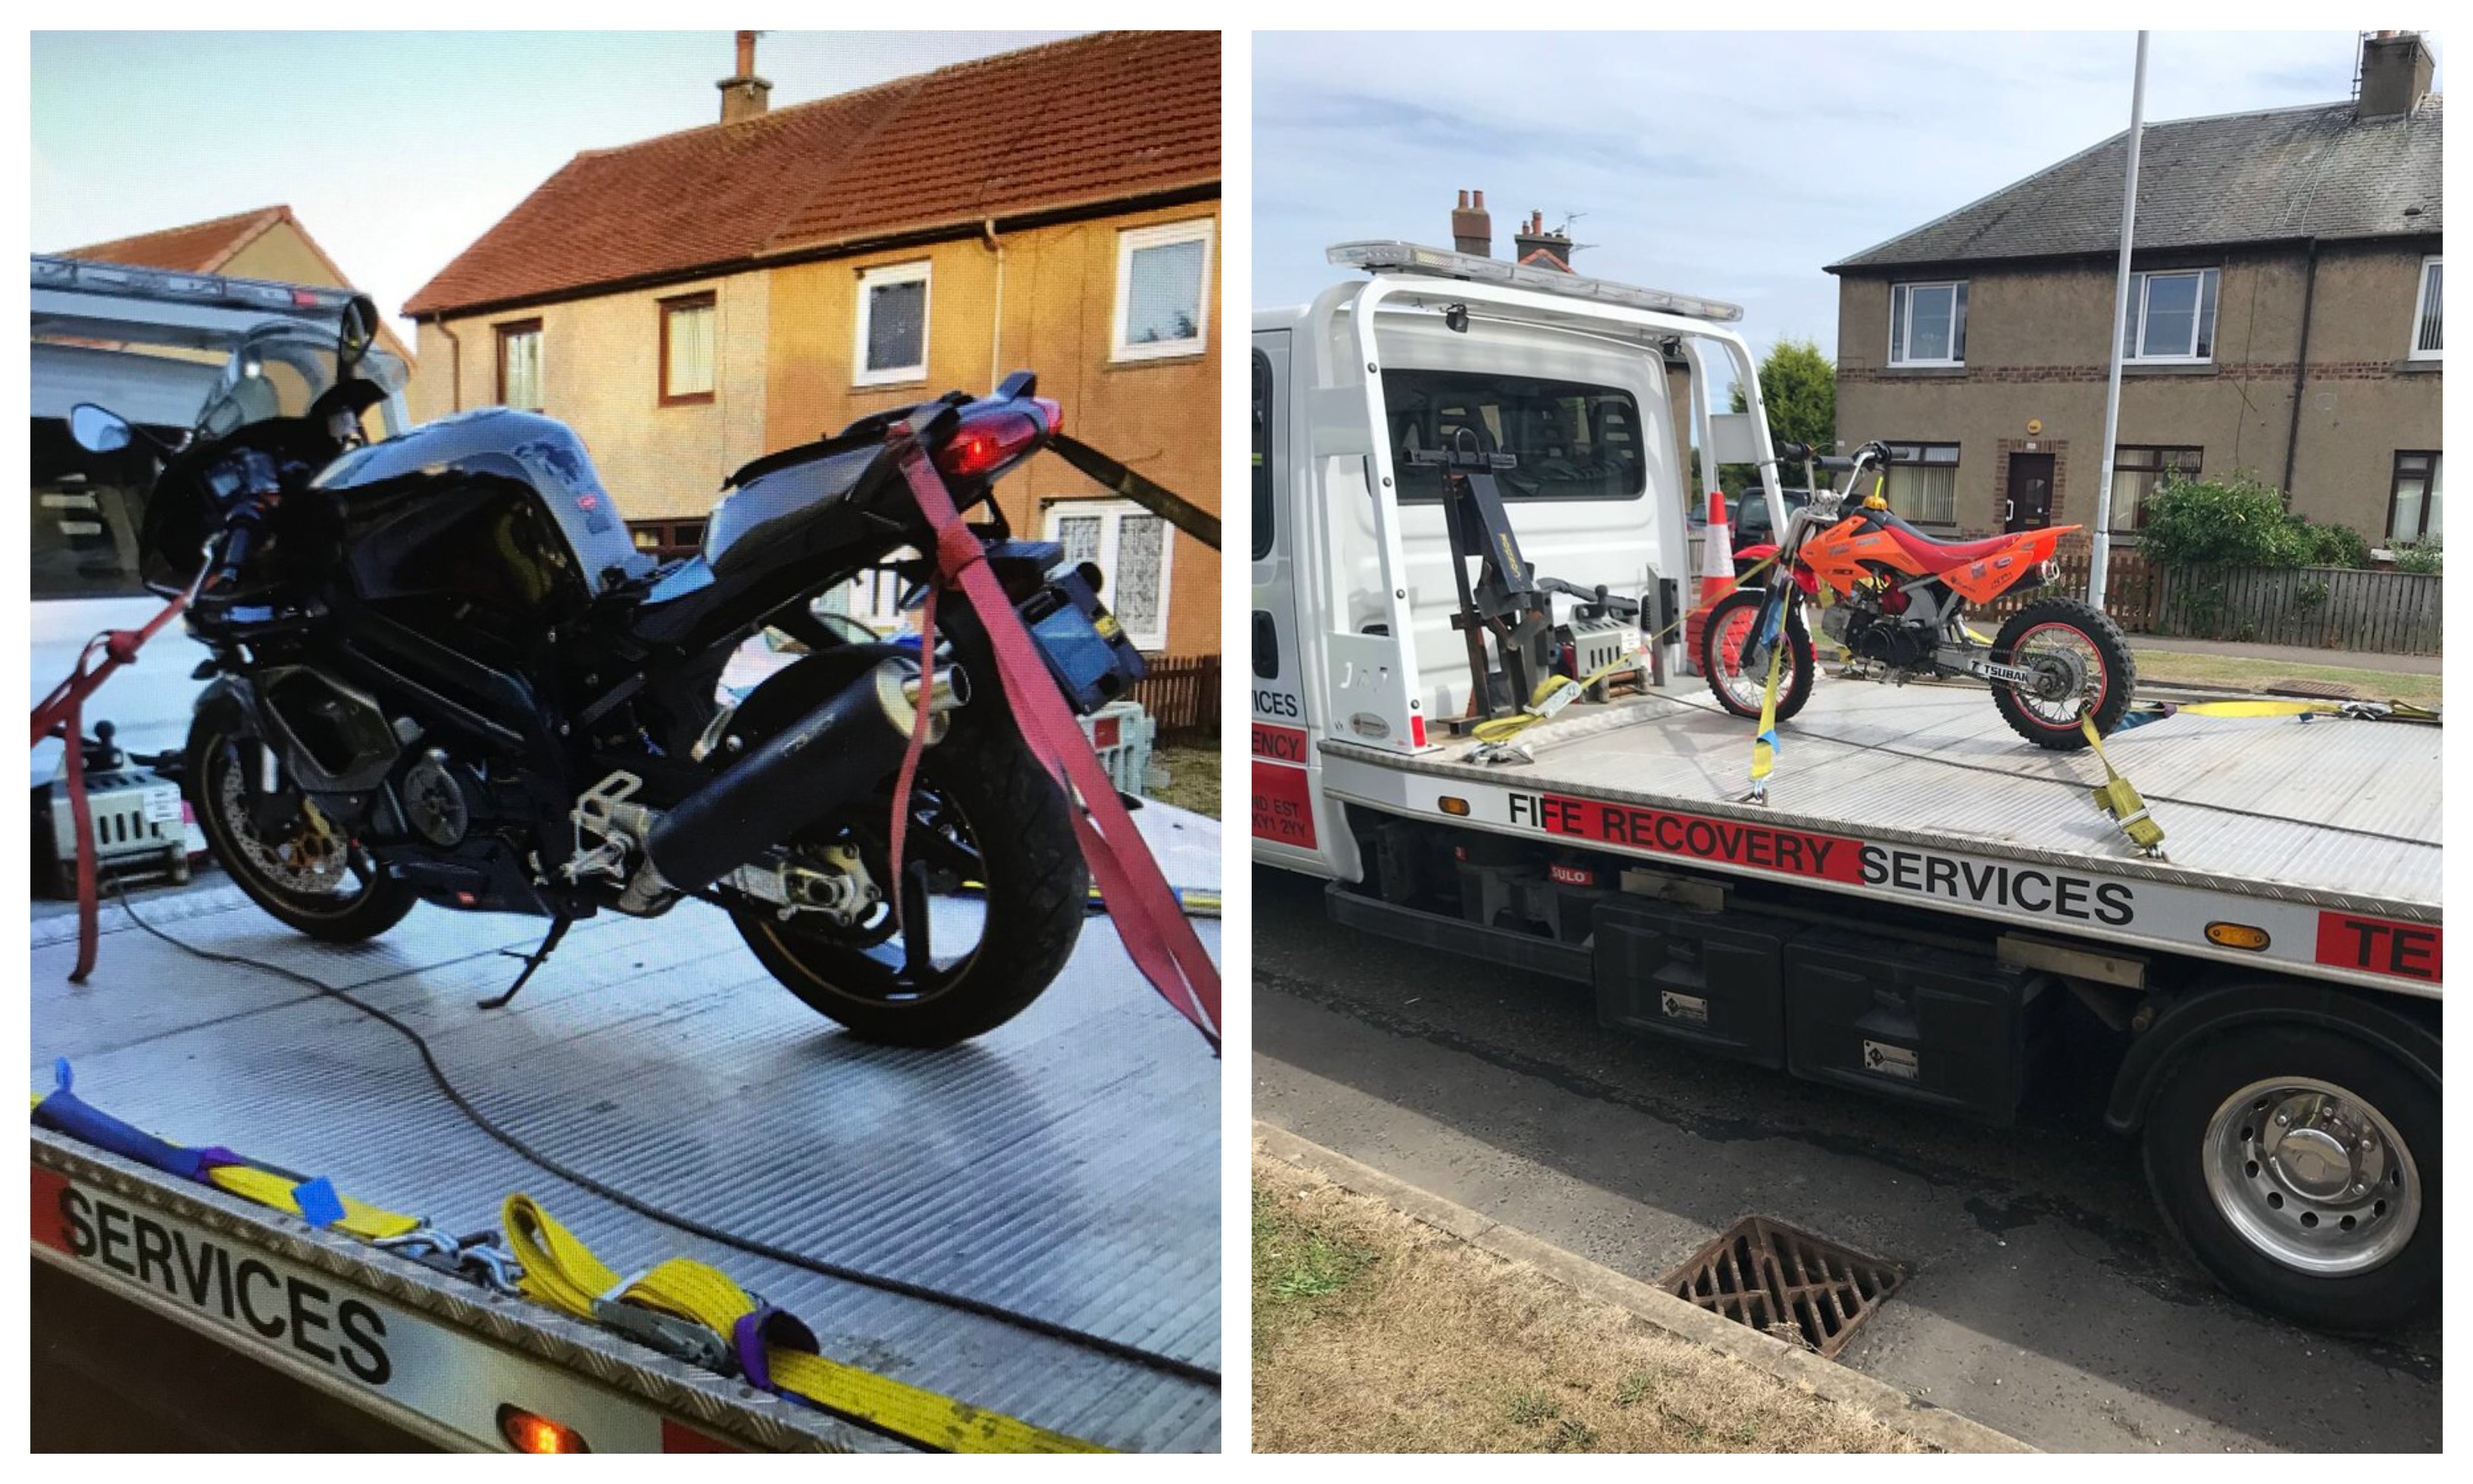 Two of the bikes seized by Levenmouth police.